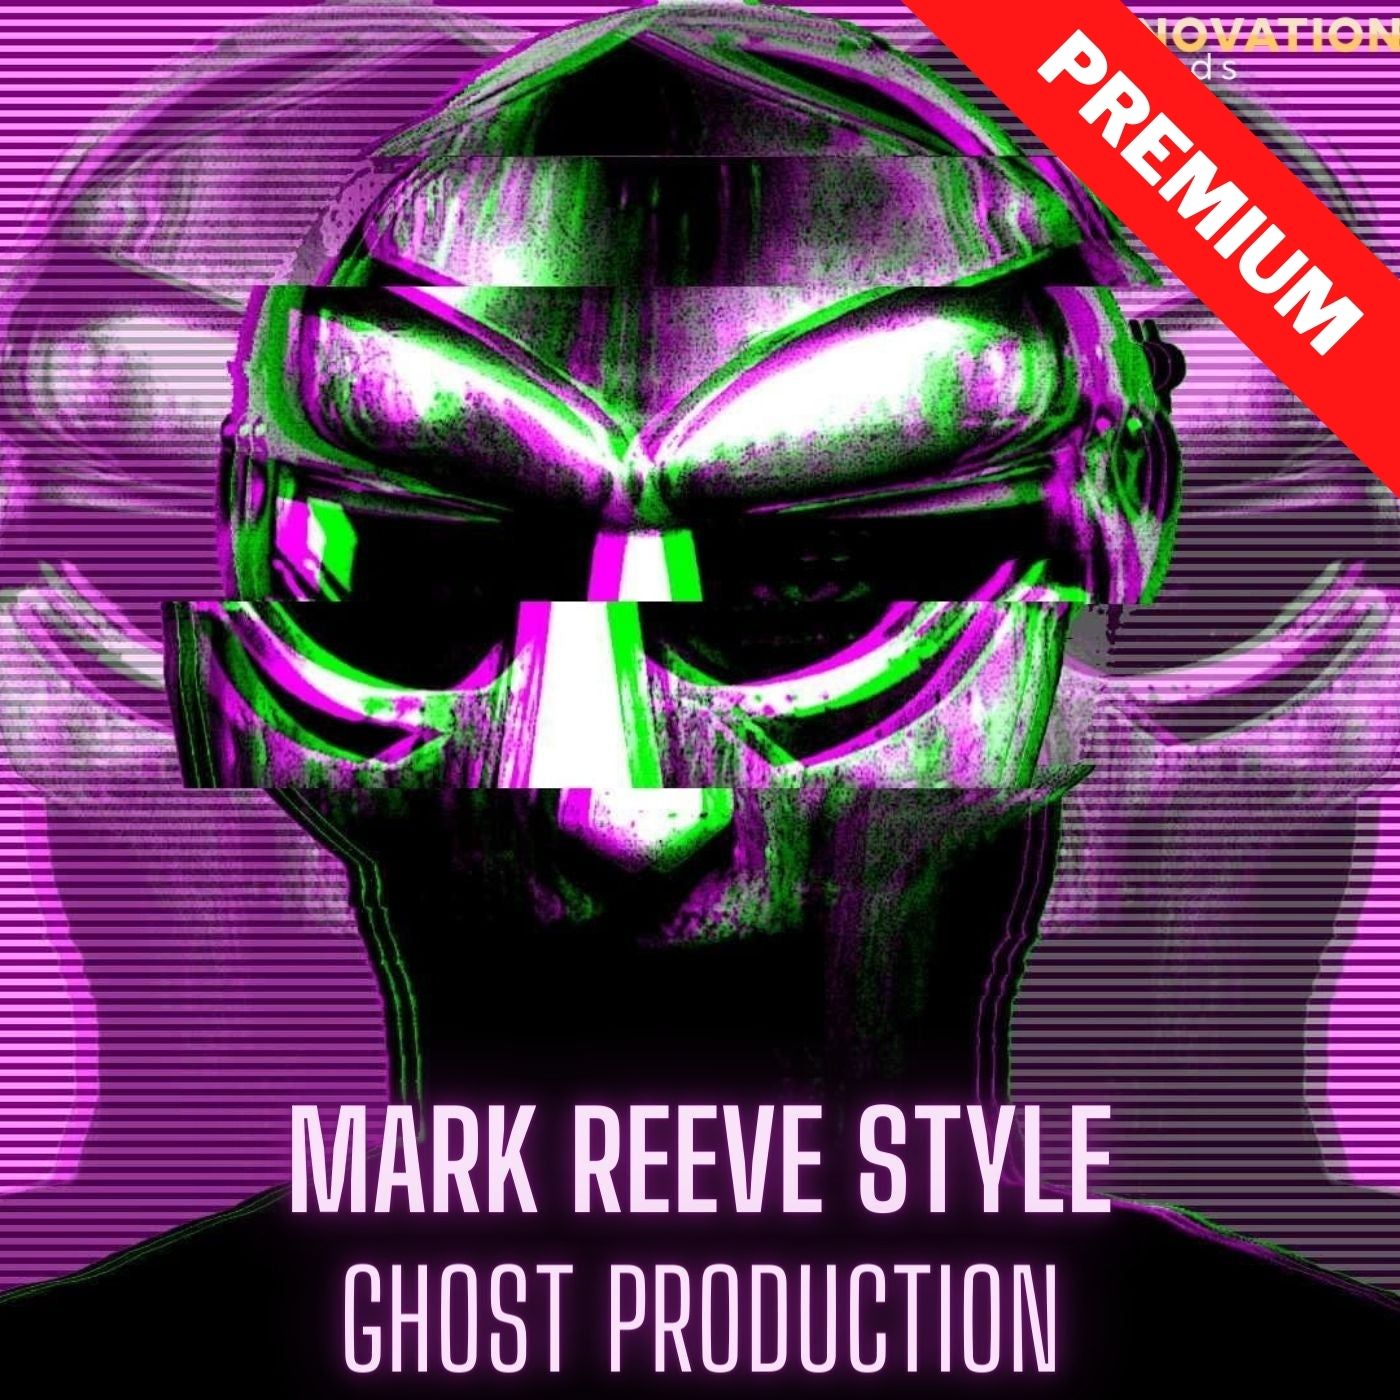 Mark Reeve Style Techno Ghost Production